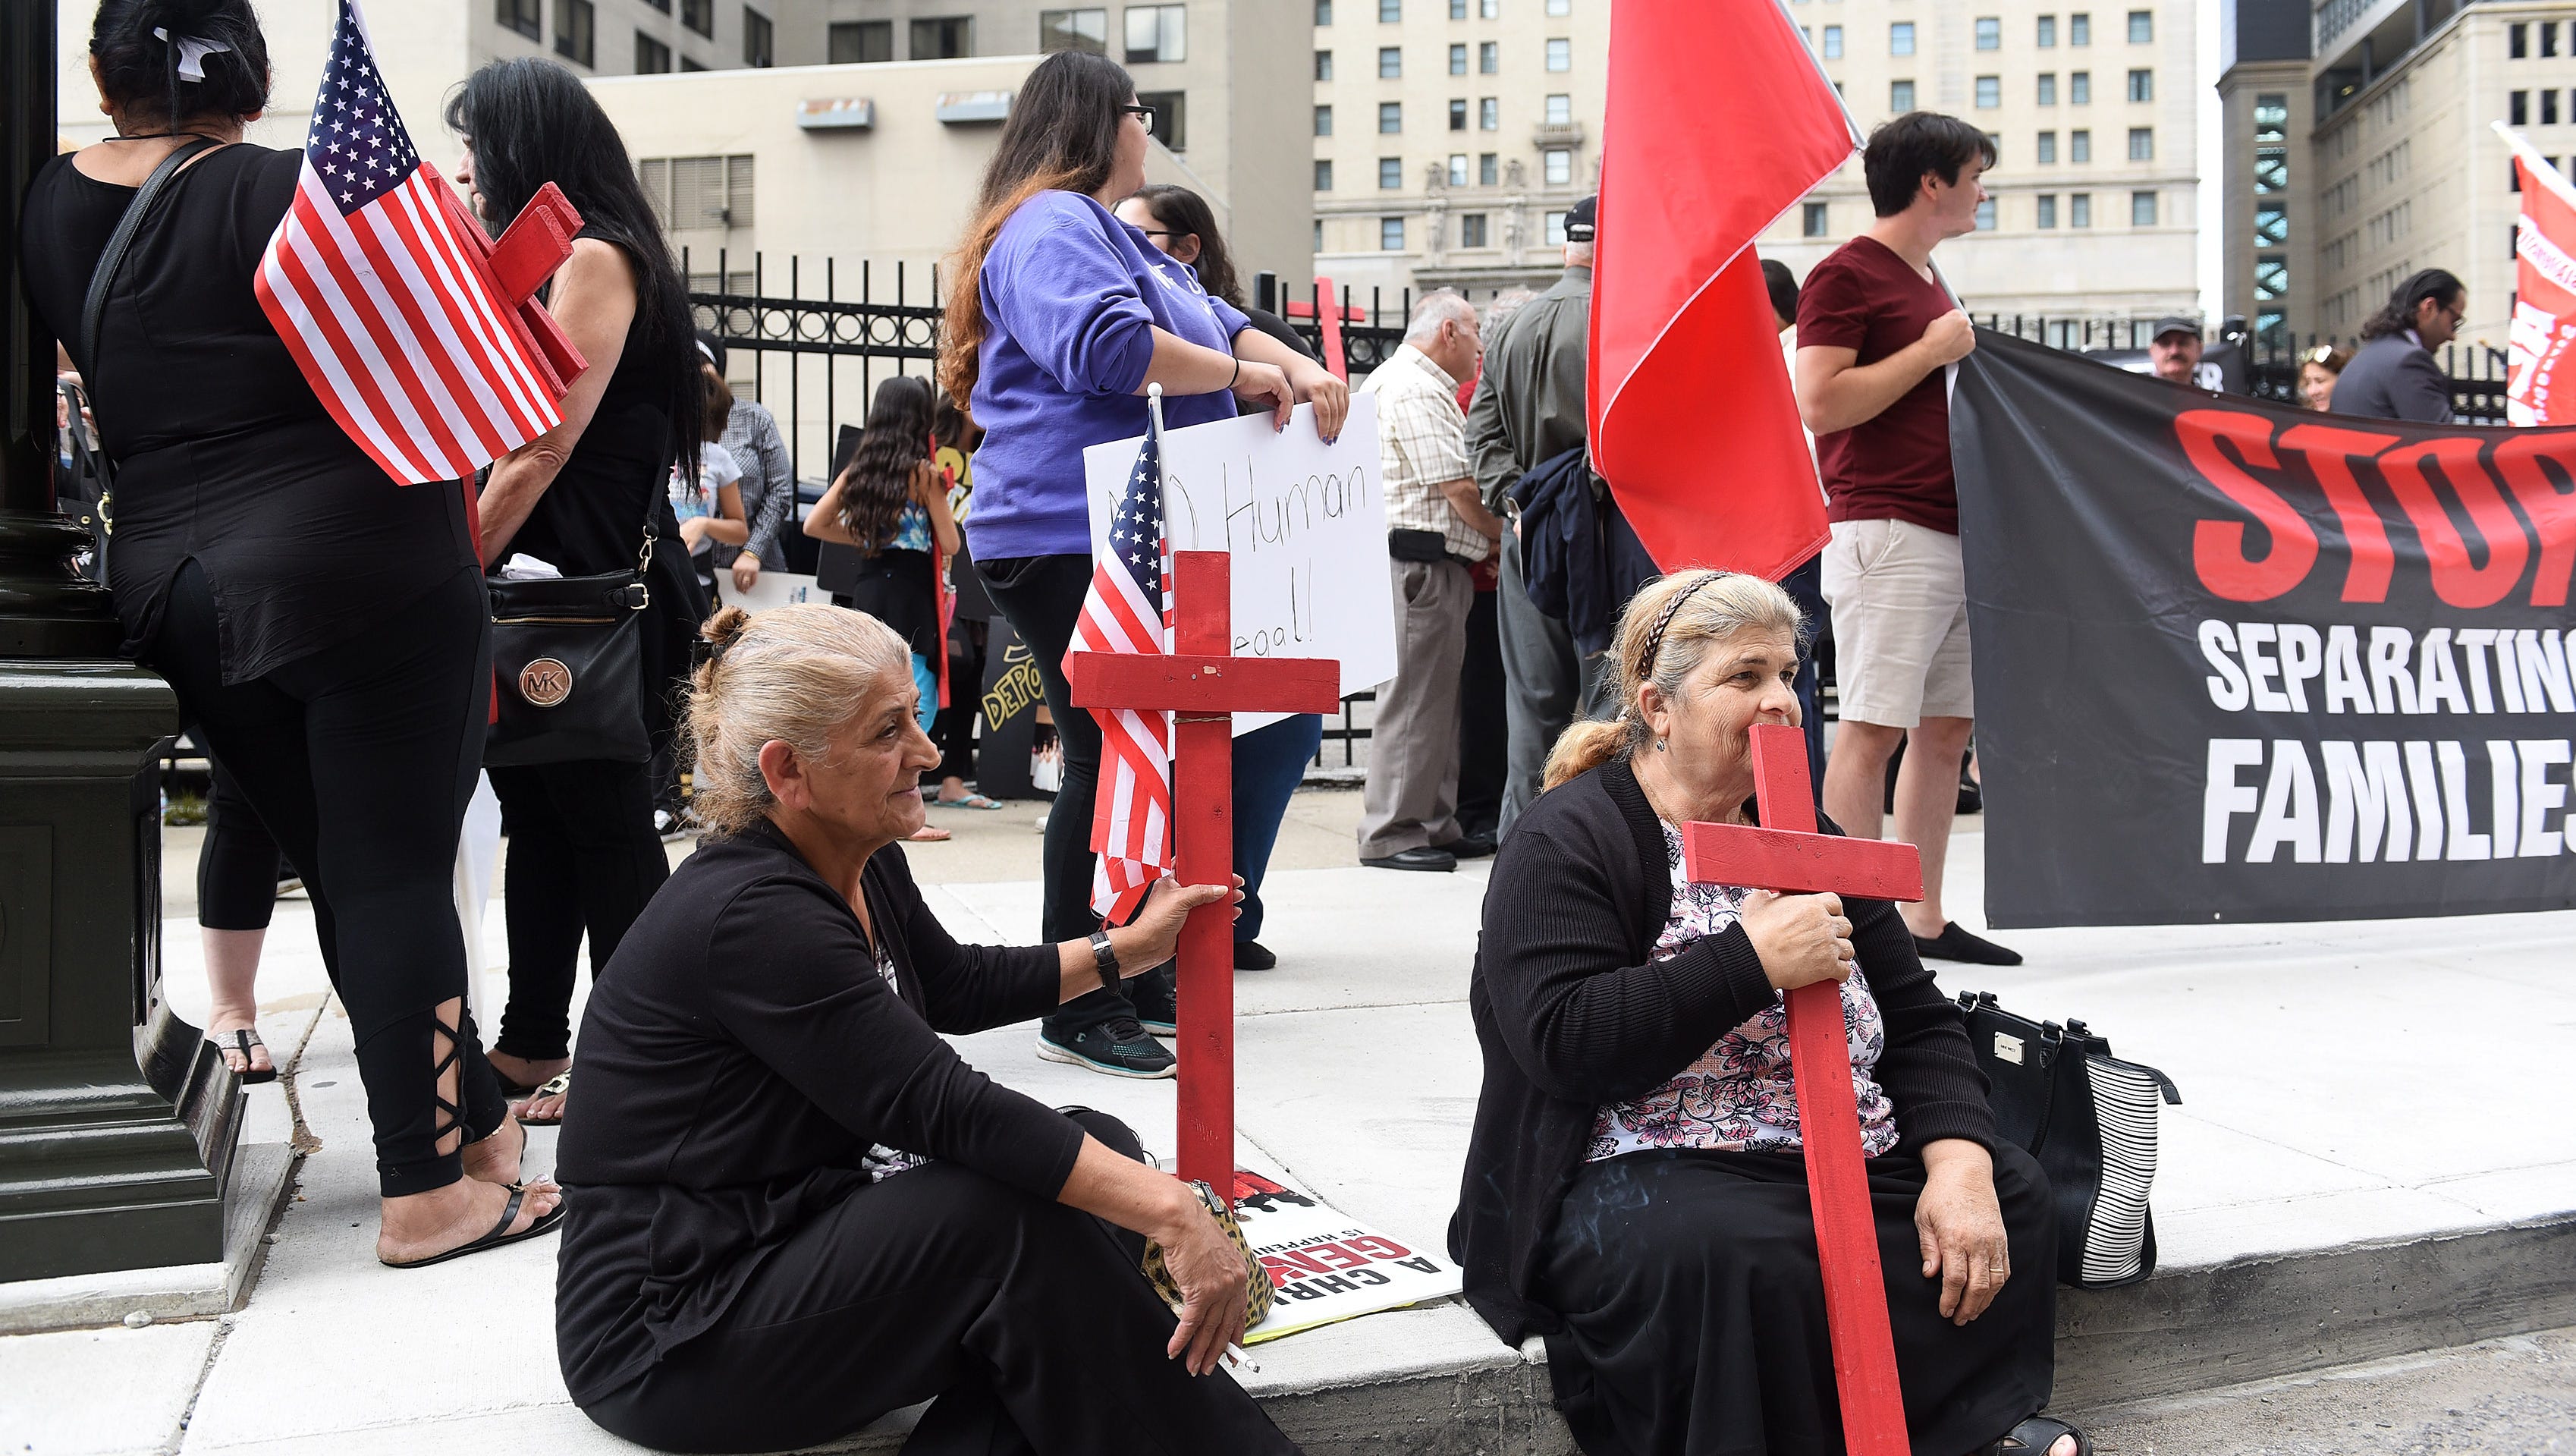 Sabria Pasha, left, of Sterling Heights, whose son is being detained, sits with Khiton Isaq of Troy at a rally in support of people who have been detained by ICE.